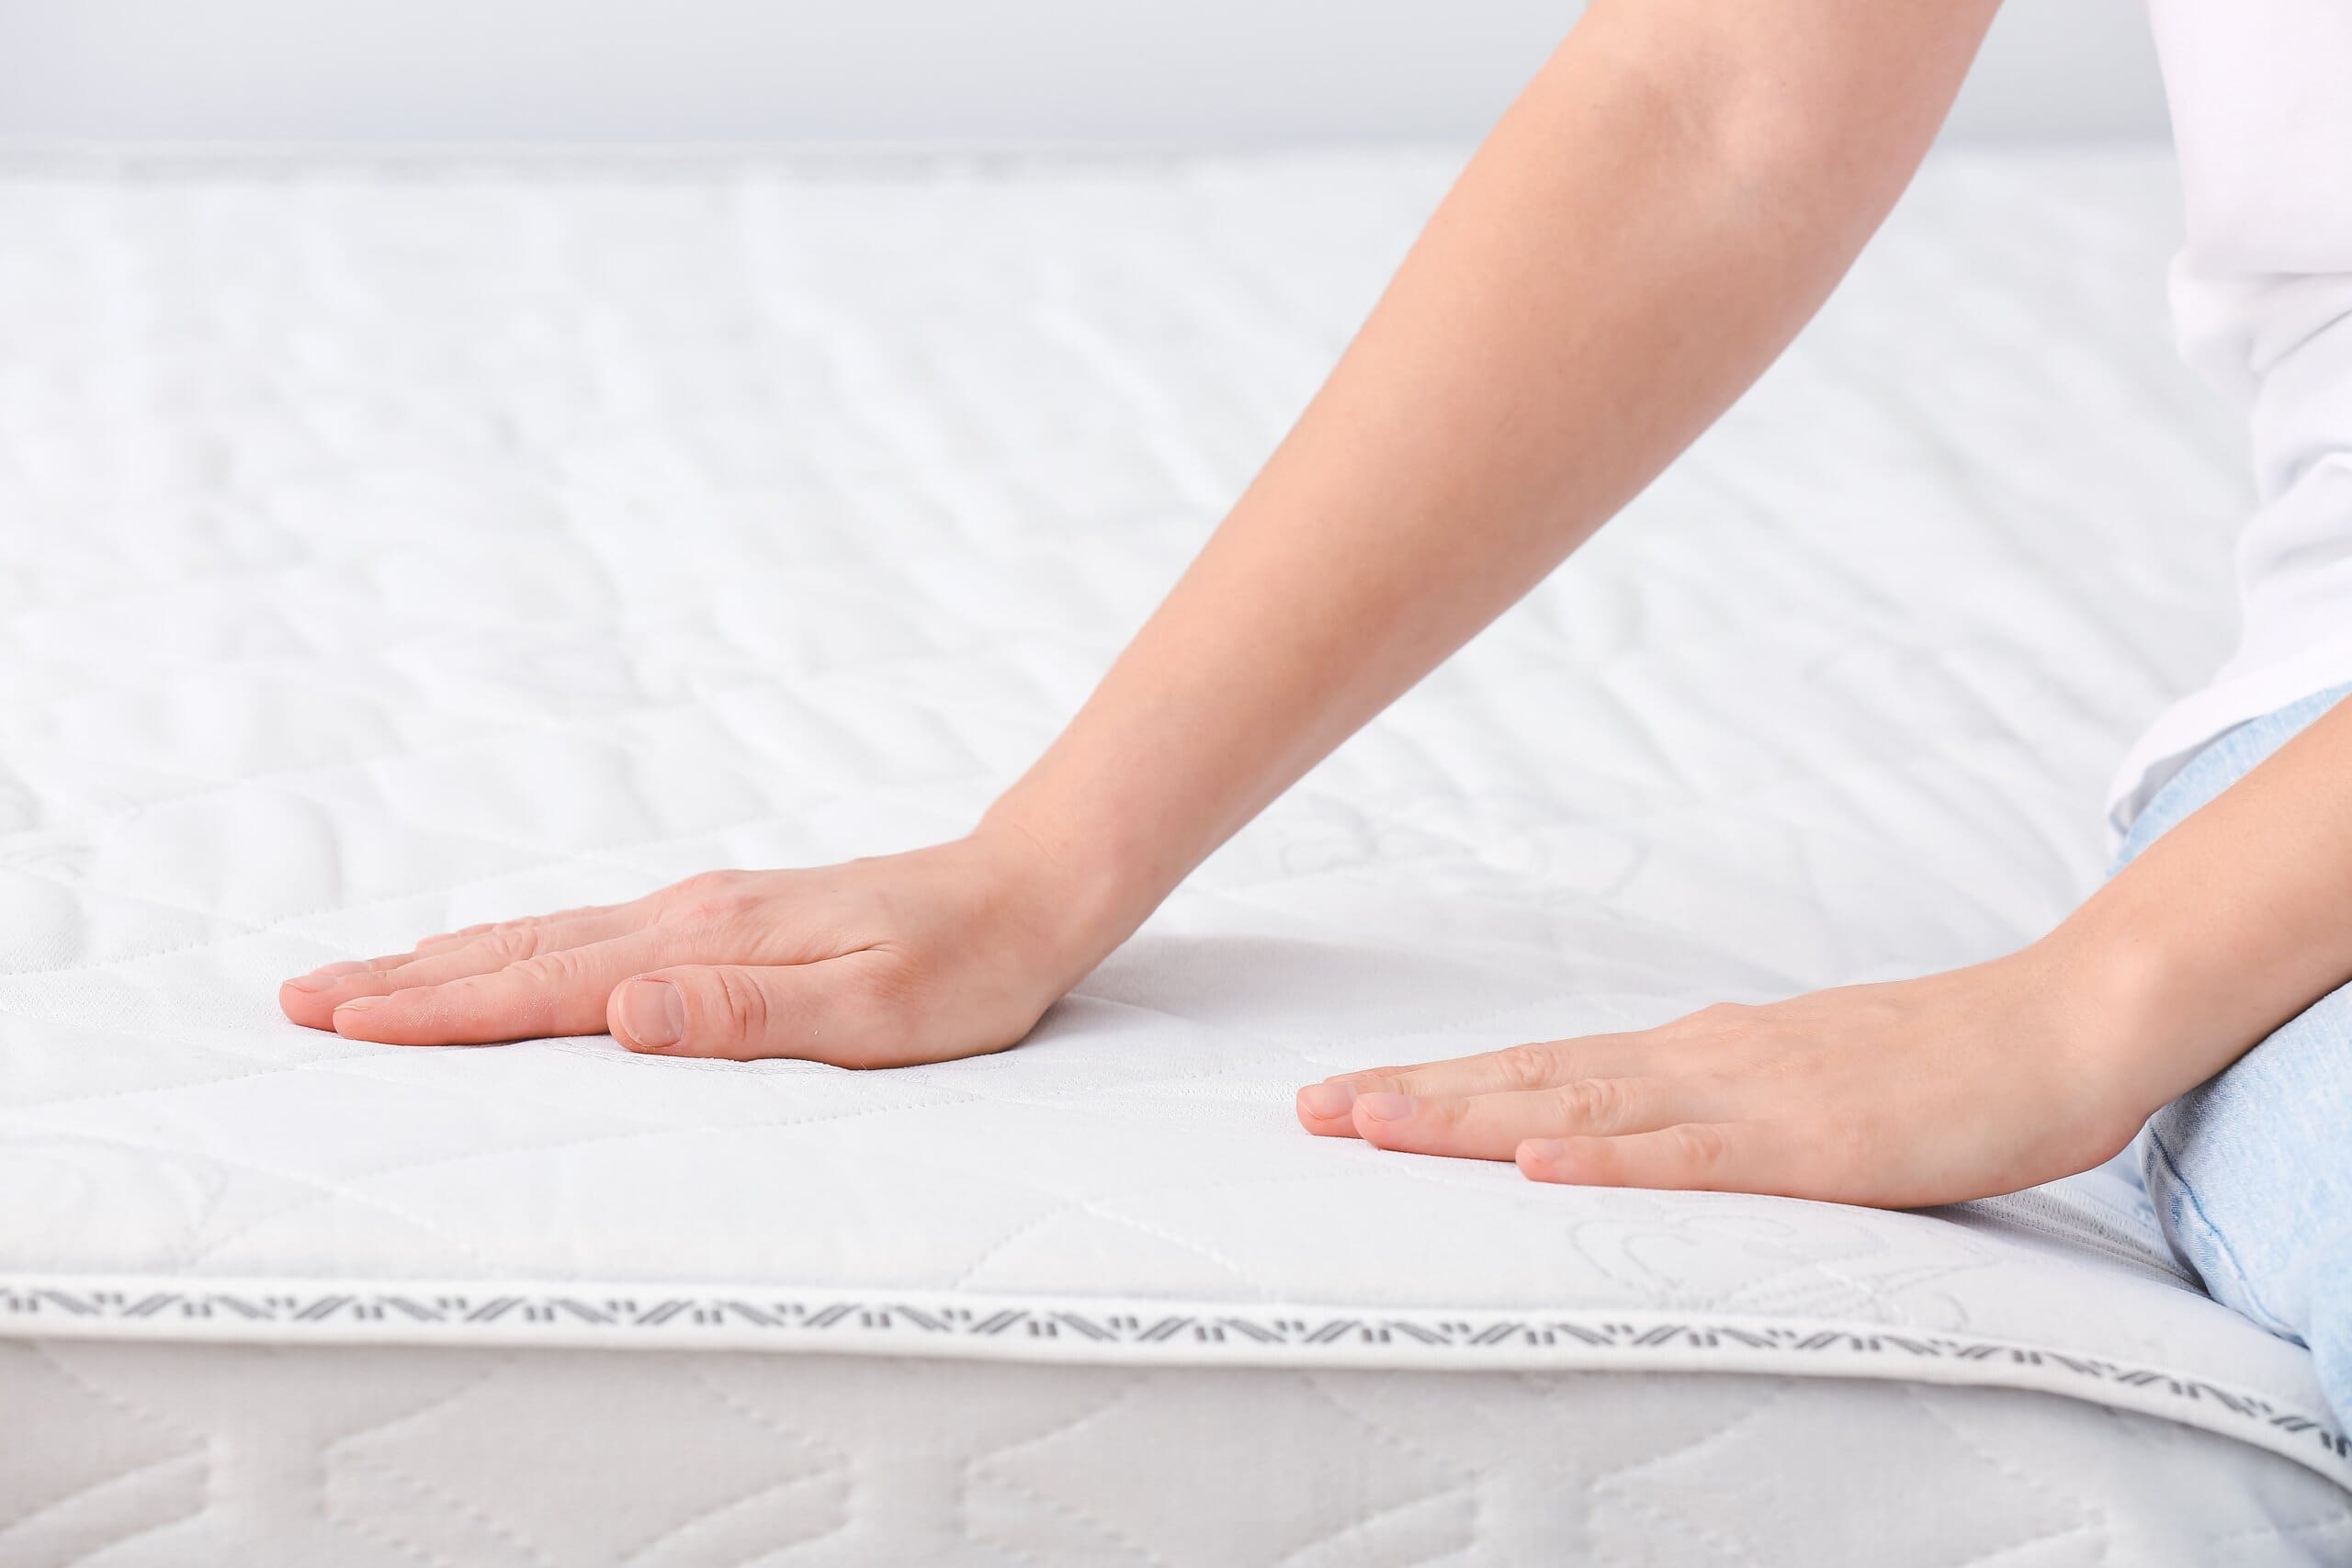 Close up of woman's hands testing the firmness of a mattress as she sits on it.